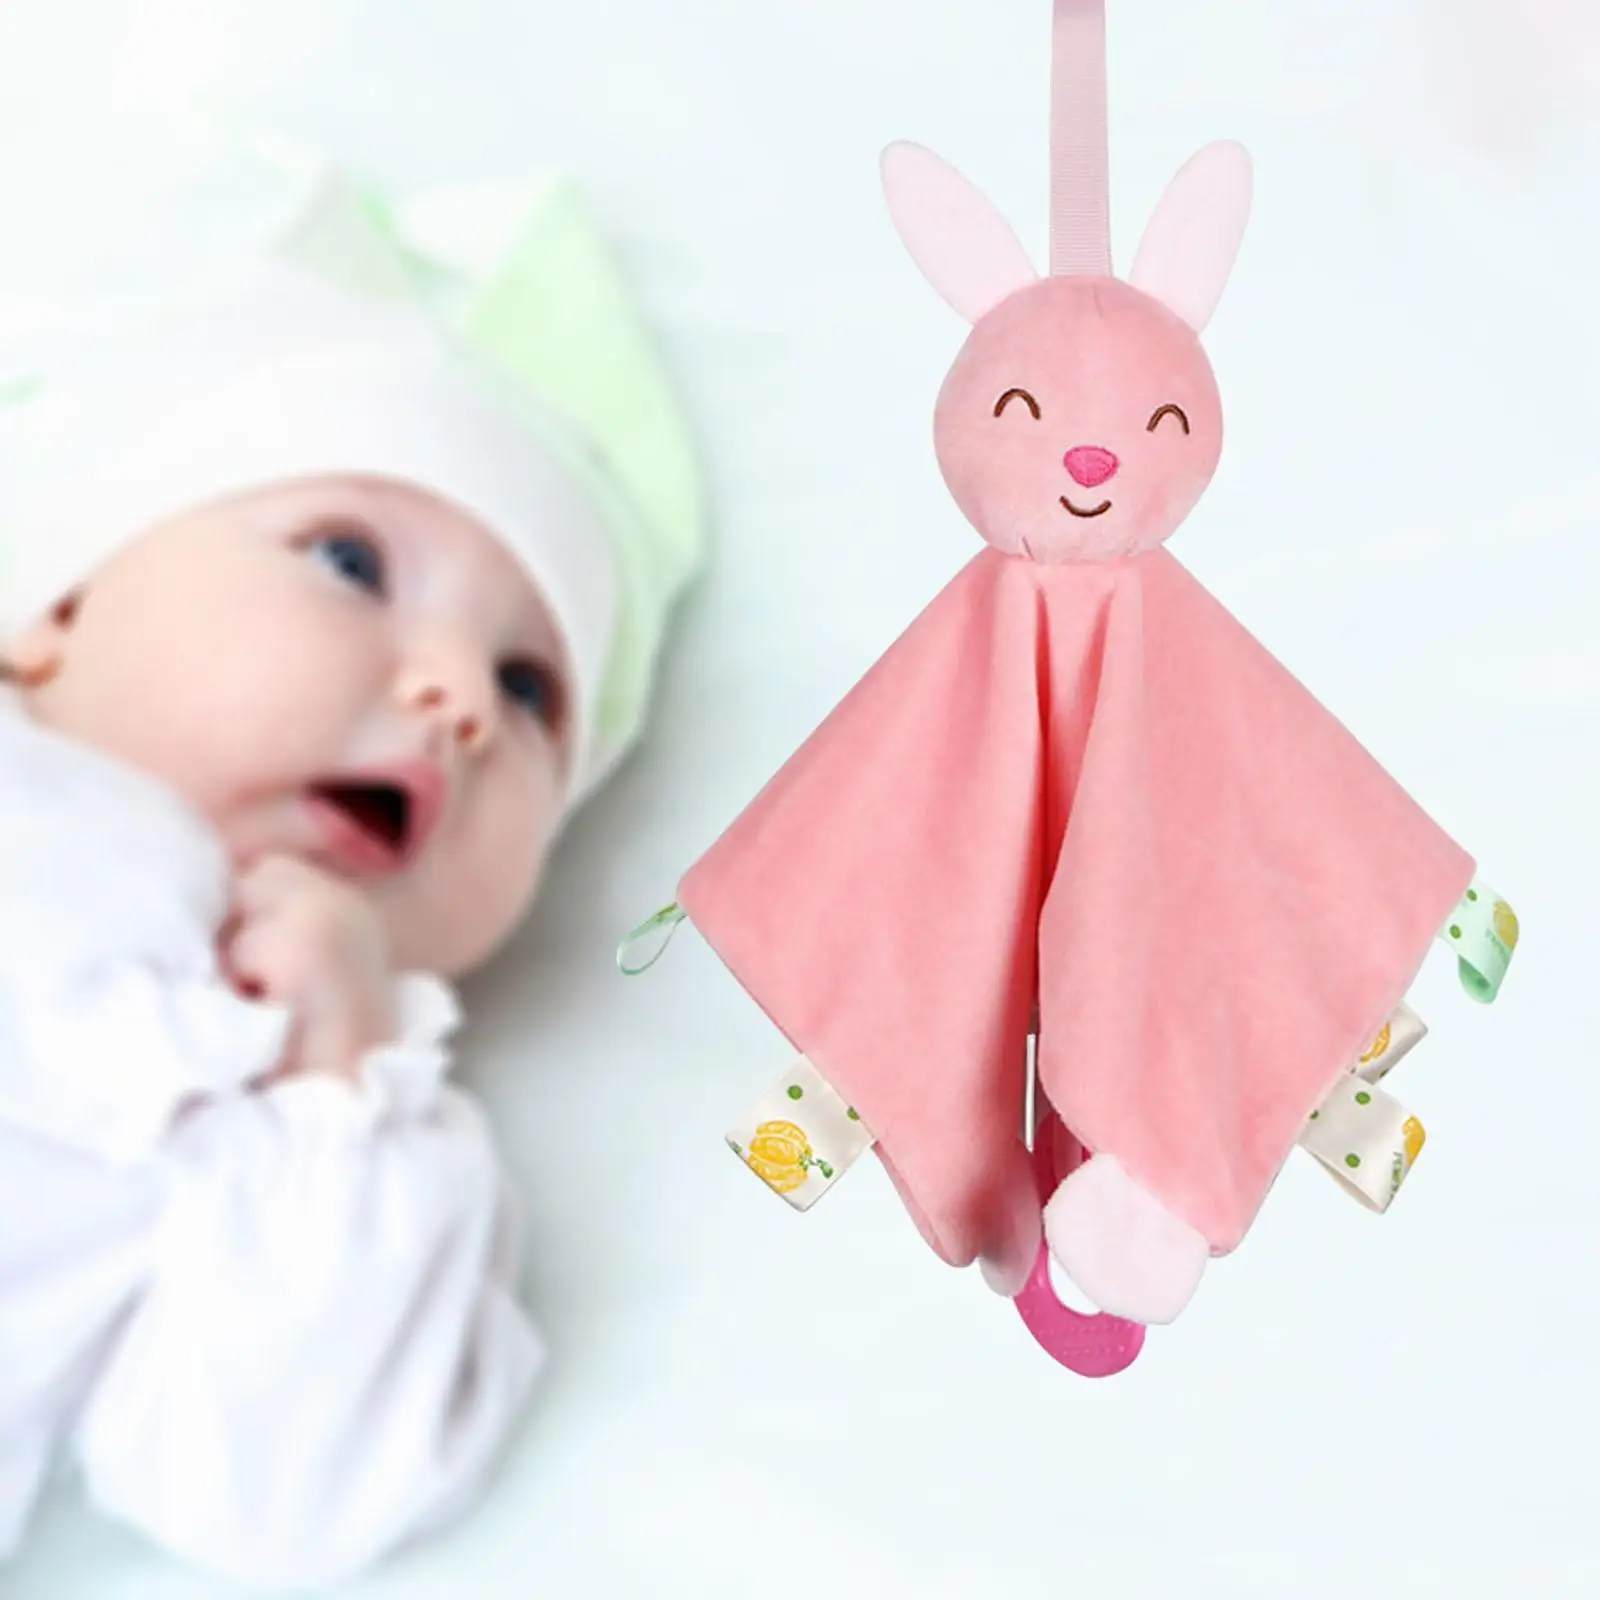 Baby Stuffed Plush Toy Teething Towel, Soft Blanket with Rattle Infant Teething Toys for Boys Girls Newborn 3- Holiday Gifts